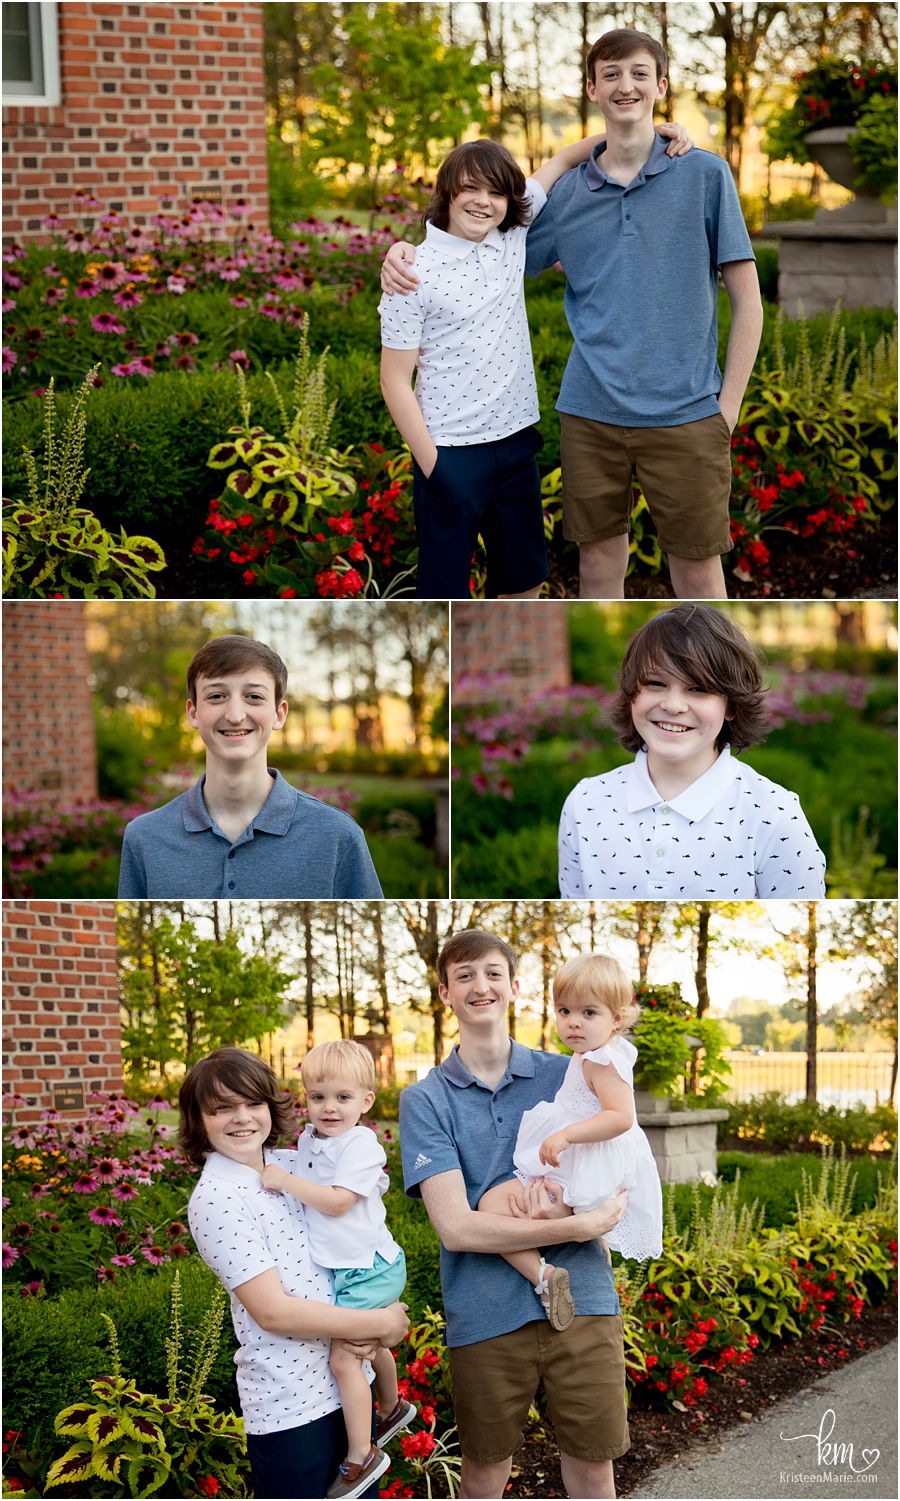 the kids outdoors - older siblings and younger sibling poses